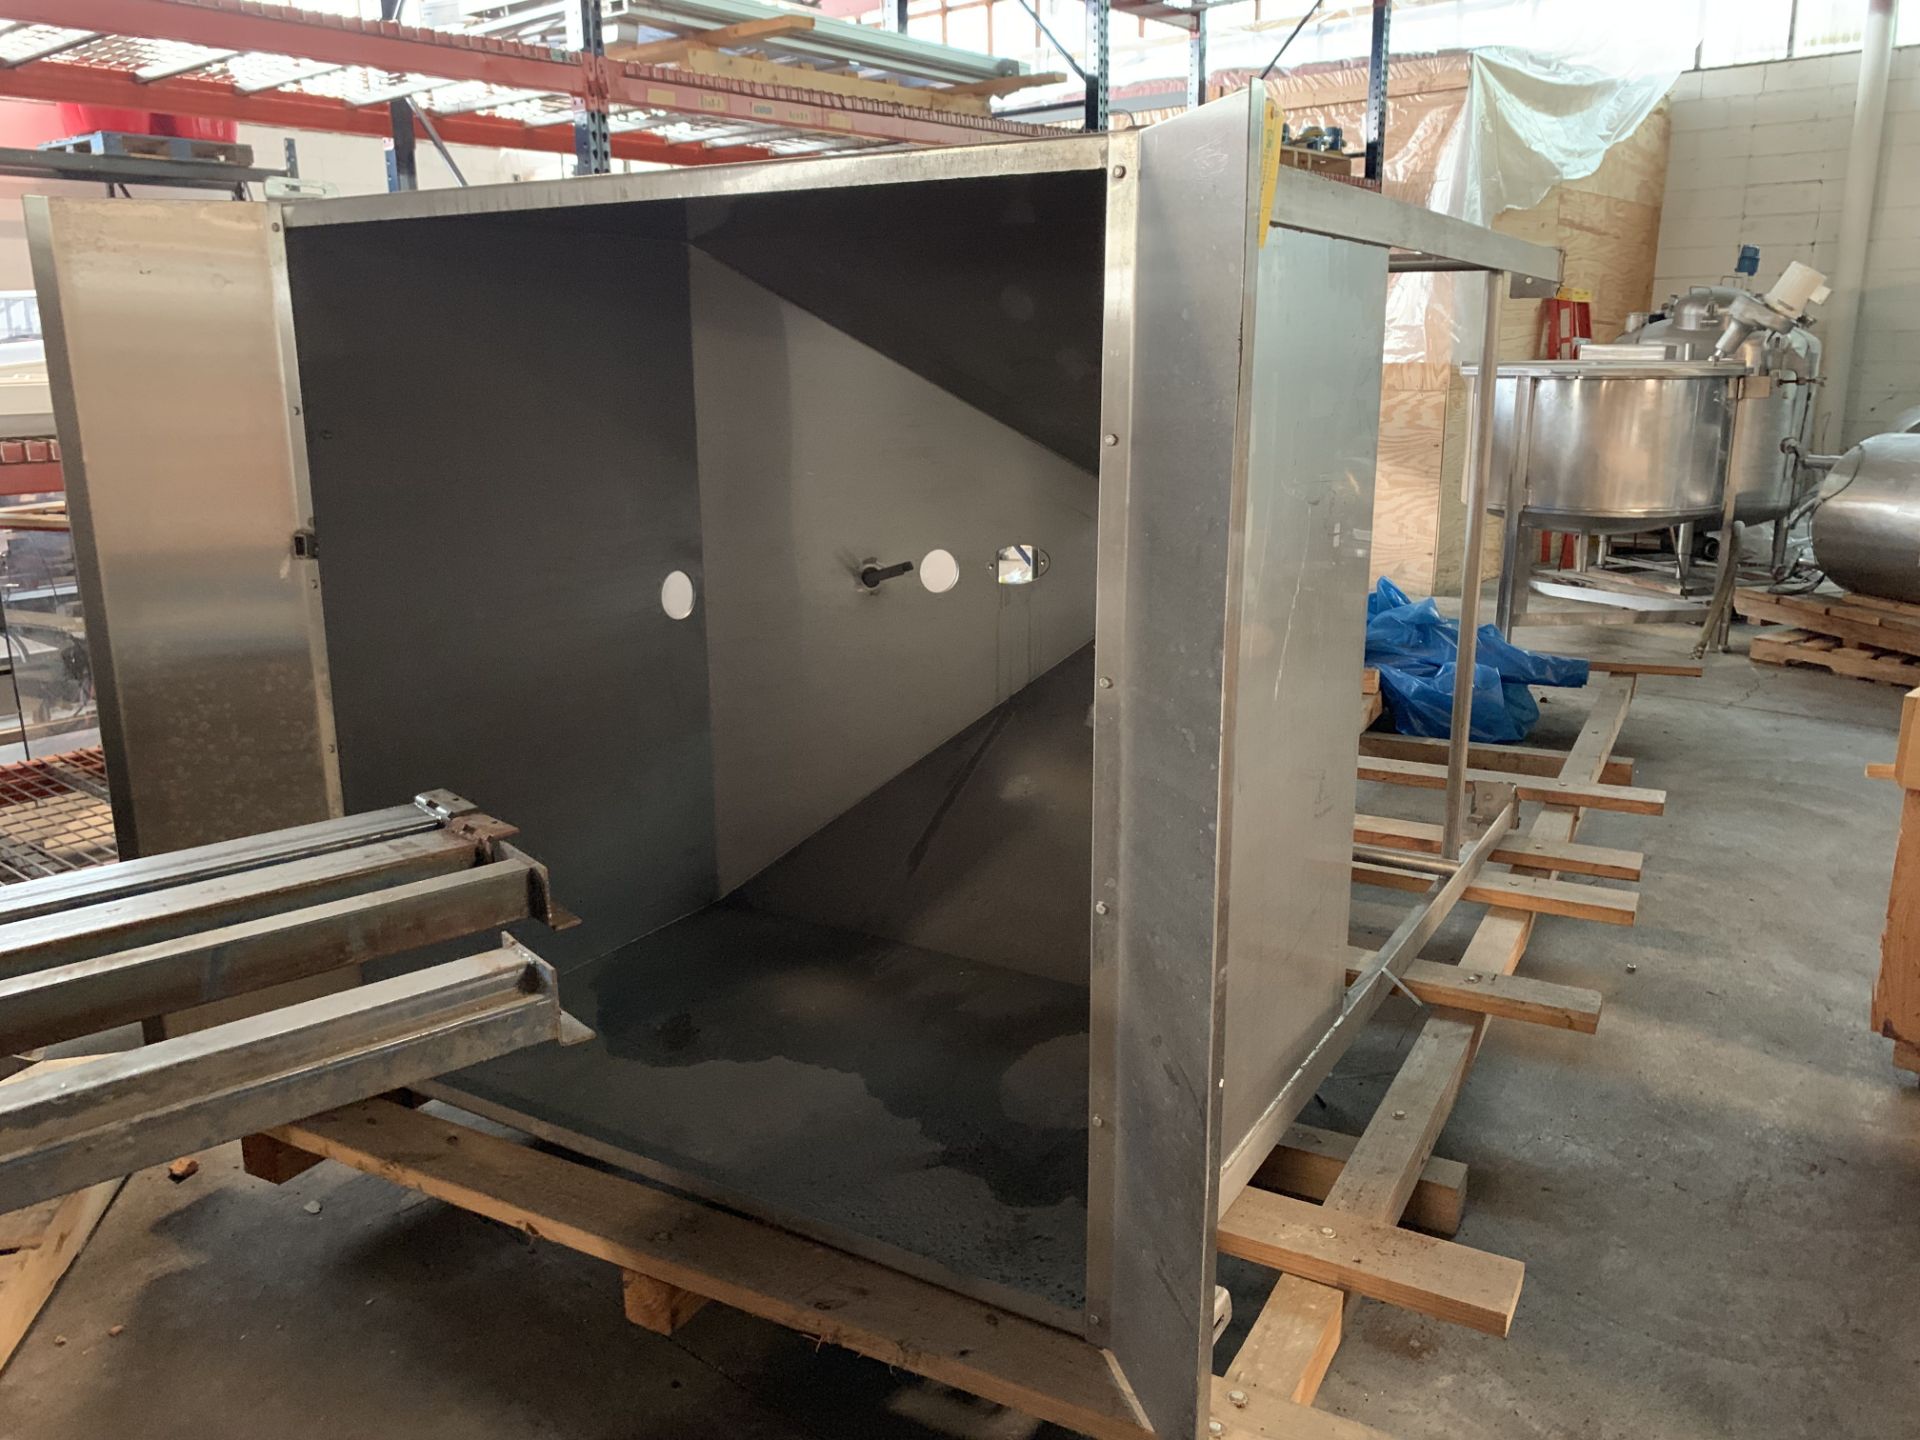 Stainless Square Hopper with Bin Fill Monitor. Rigging Fee: $400